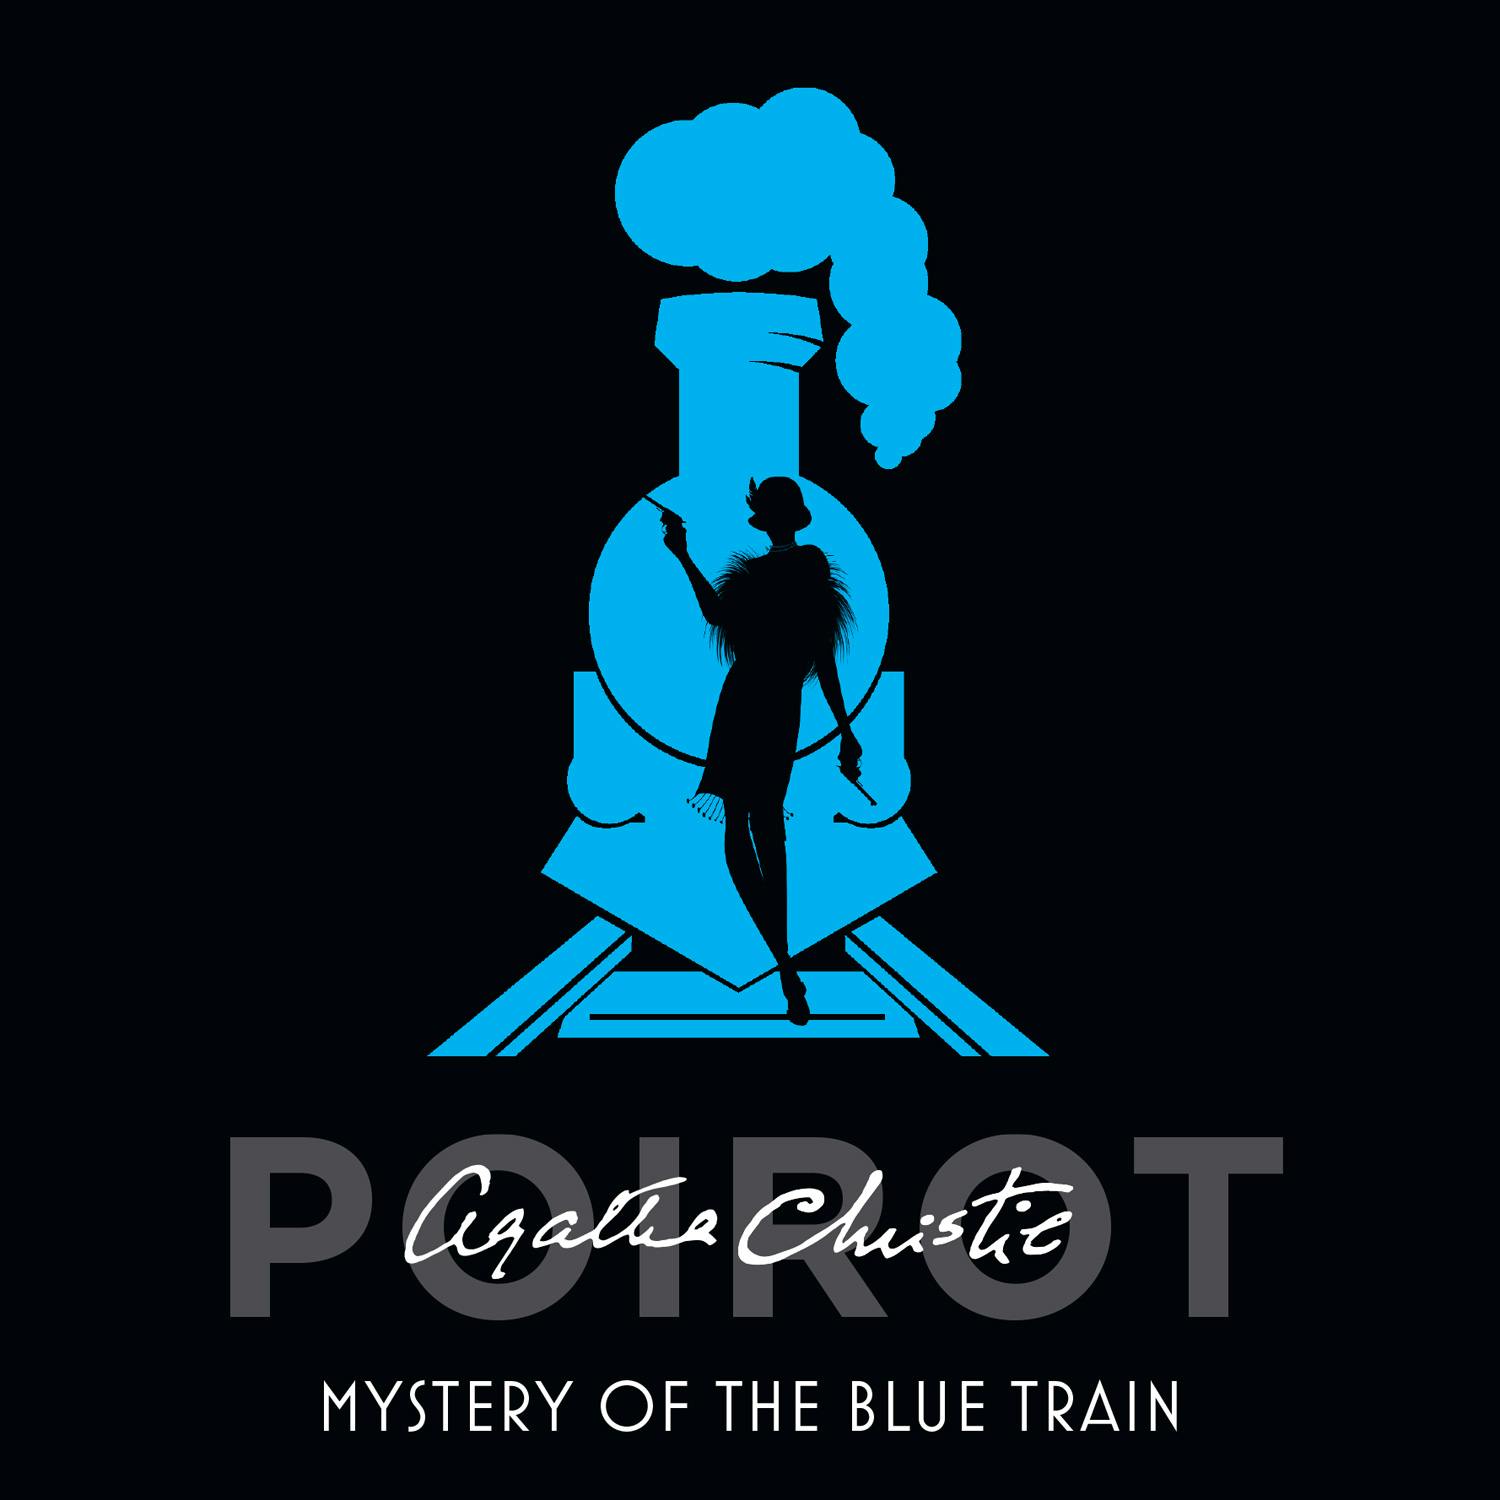 The Mystery of the Blue Train - undefined